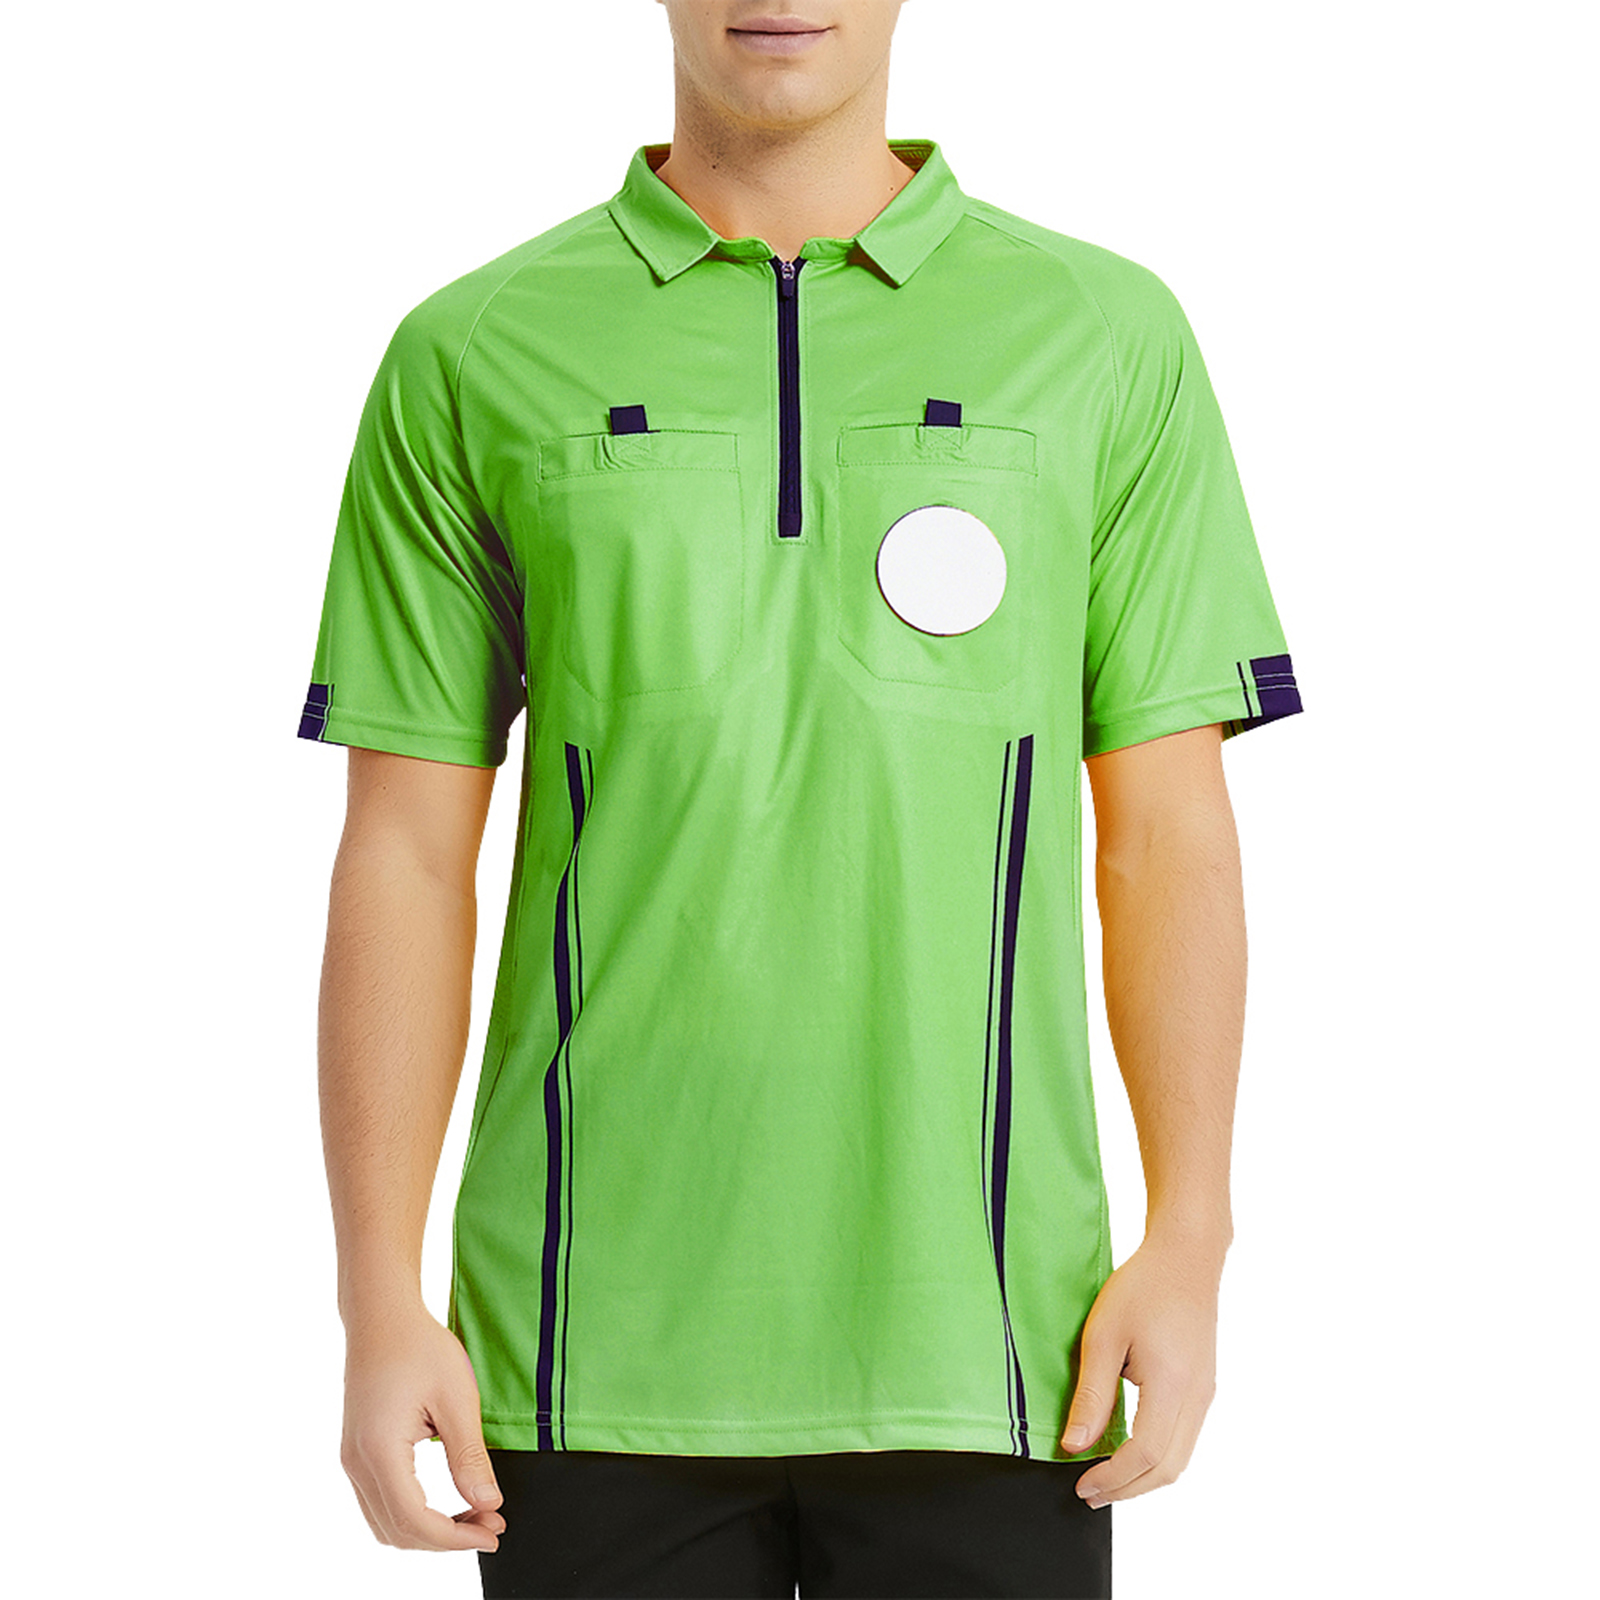 TOPTIE Men's Soccer Referee Jersey Officials Pro Short Sleeve Referee Shirts  Sale, Reviews. - Opentip